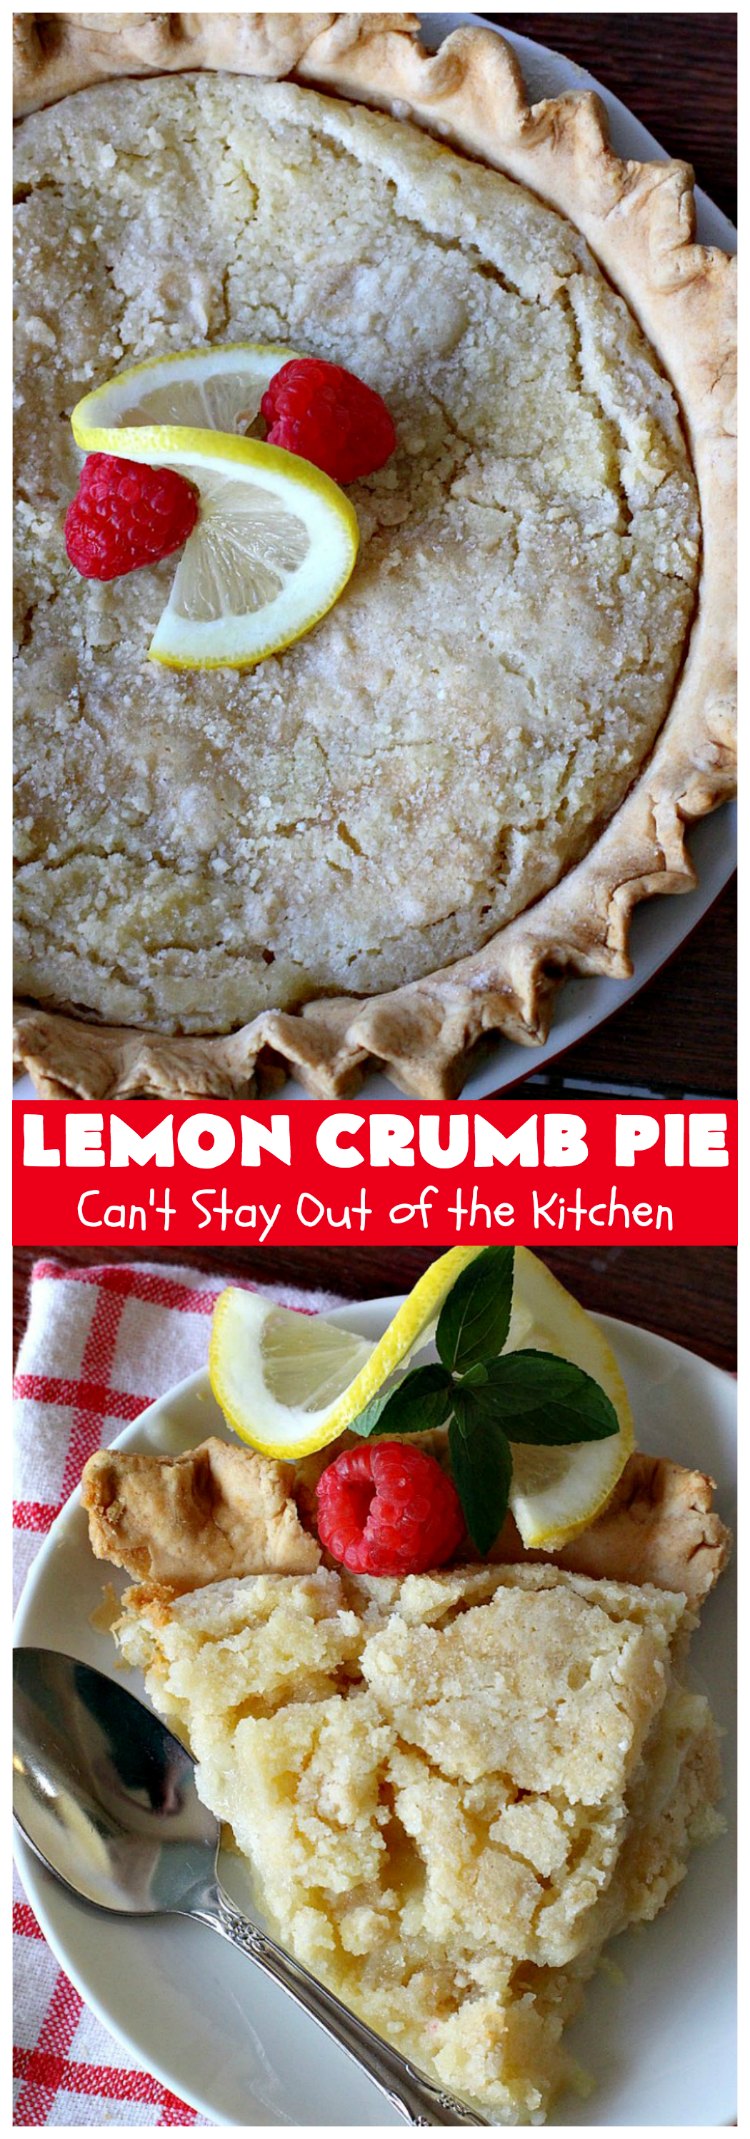 Lemon Crumb Pie | Can't Stay Out of the Kitchen